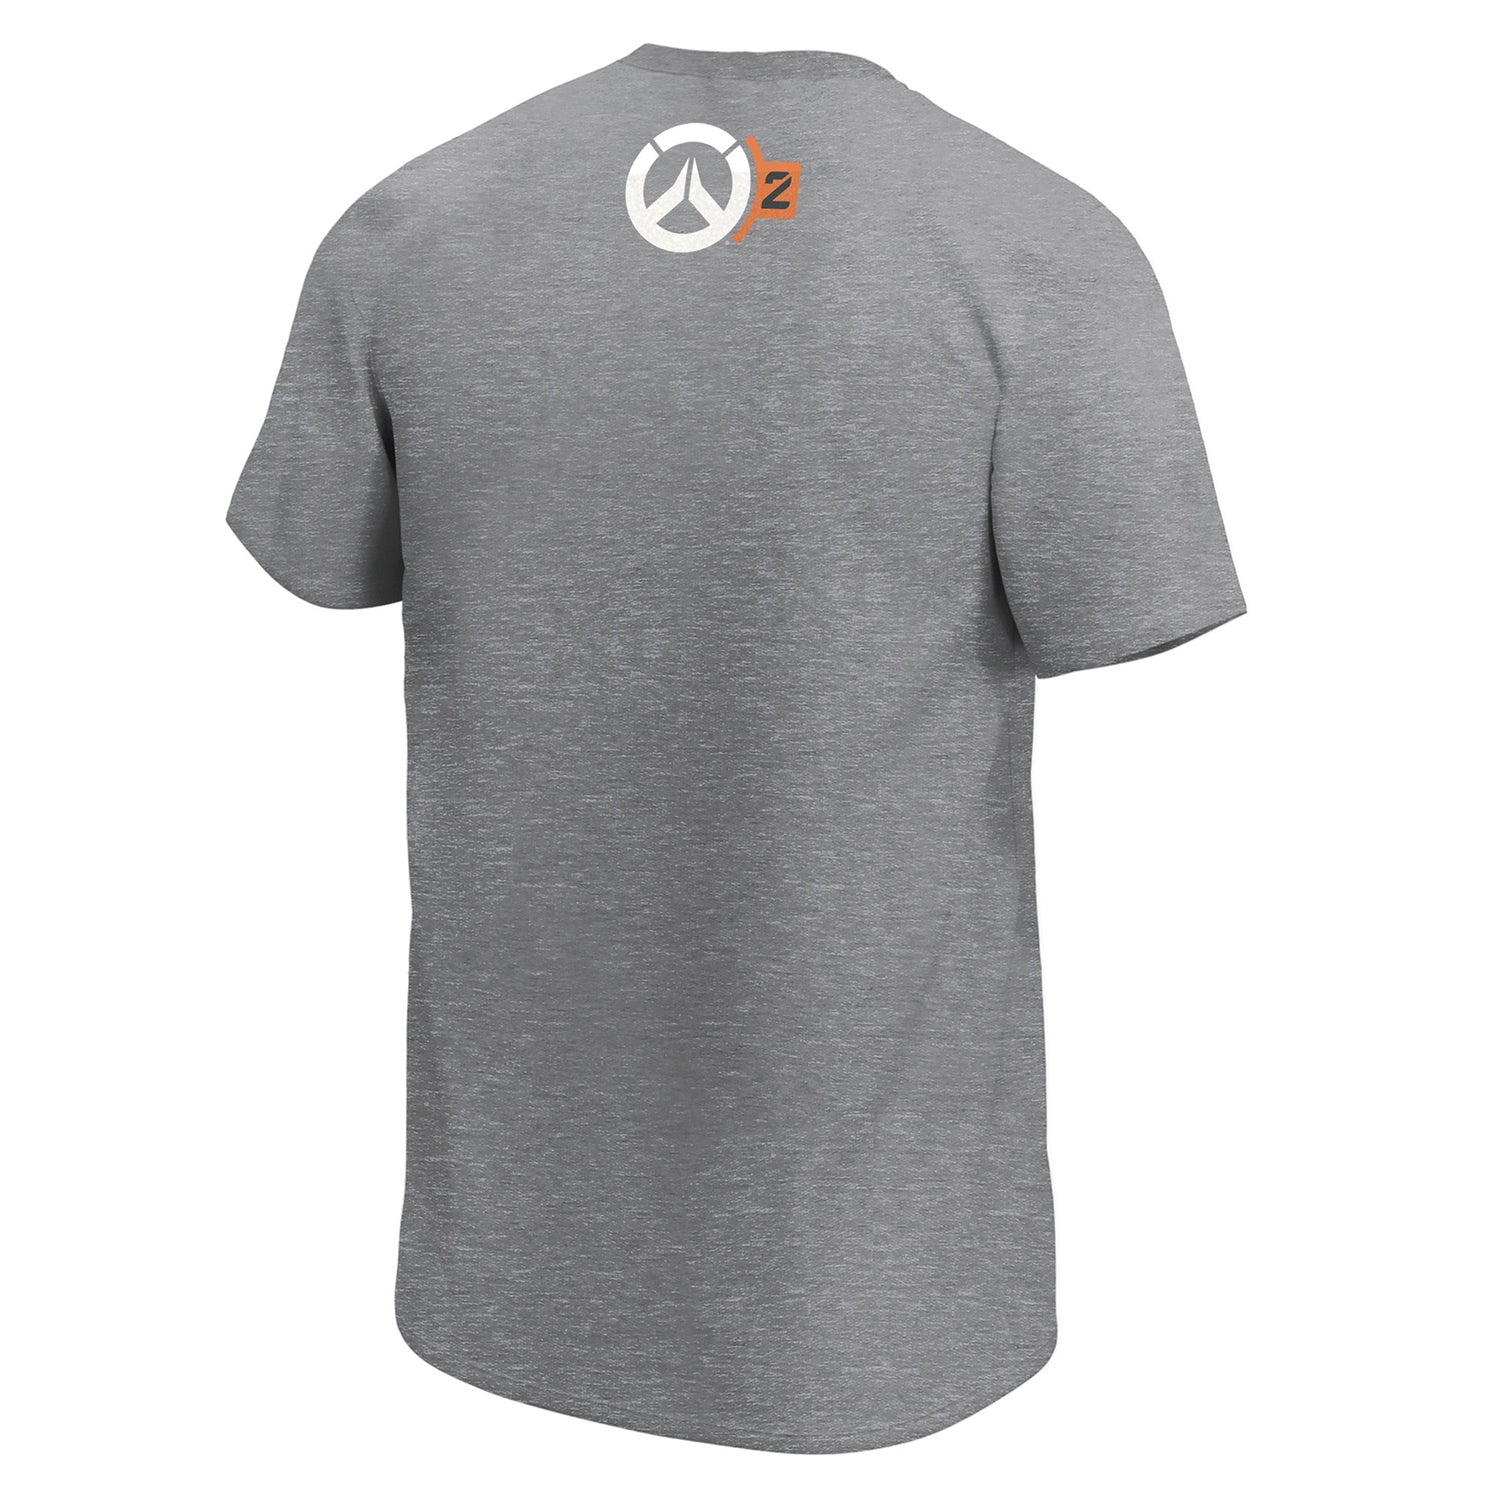 Overwatch 2 Tracer Charcoal Grey T-Shirt - Back View